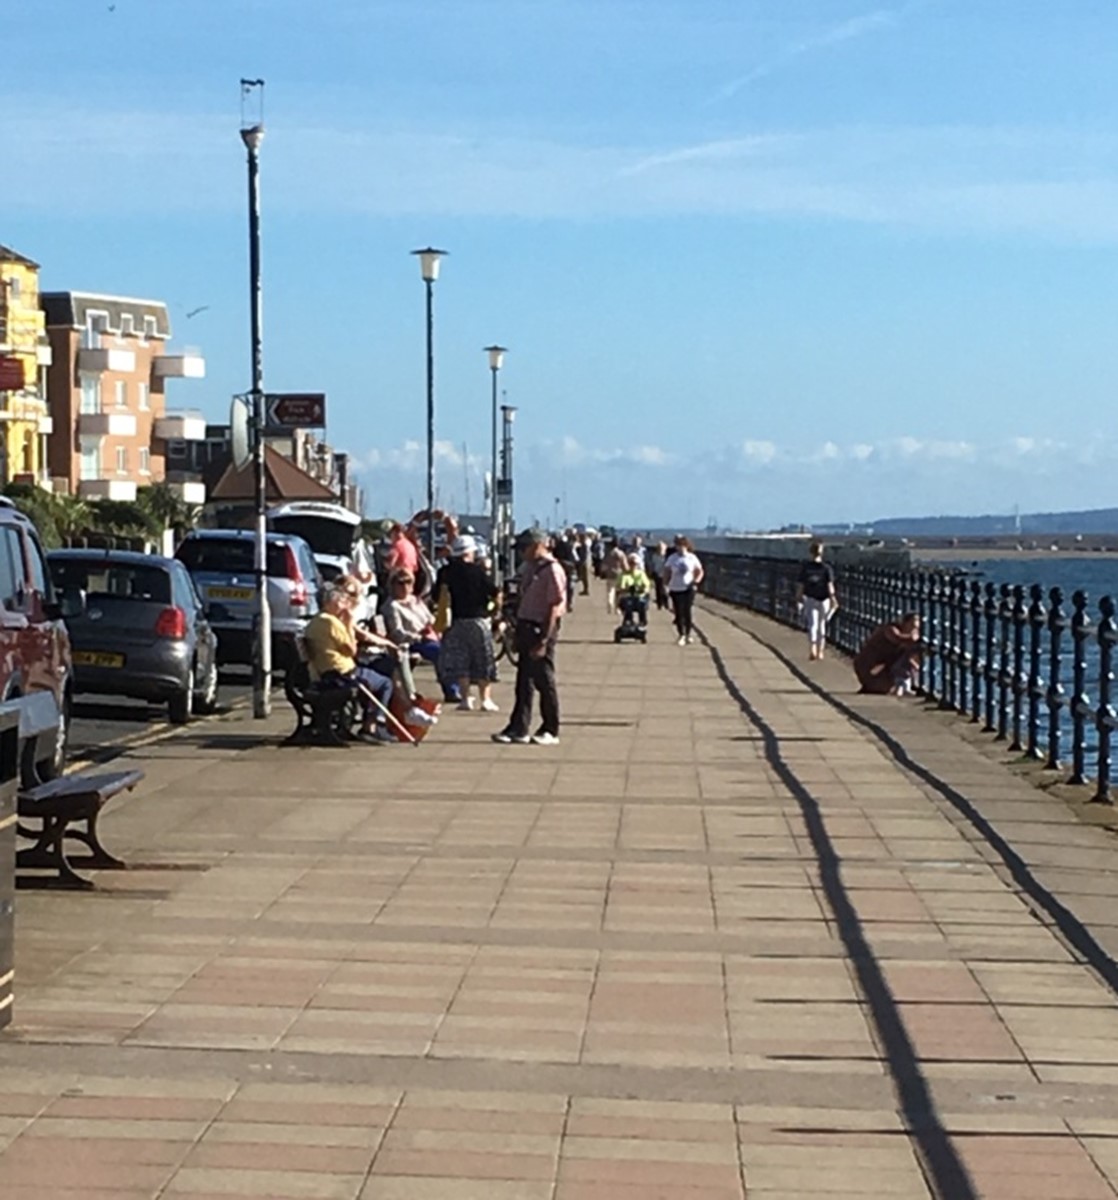 West Kirby promenade image showing people walking on a sunny day.